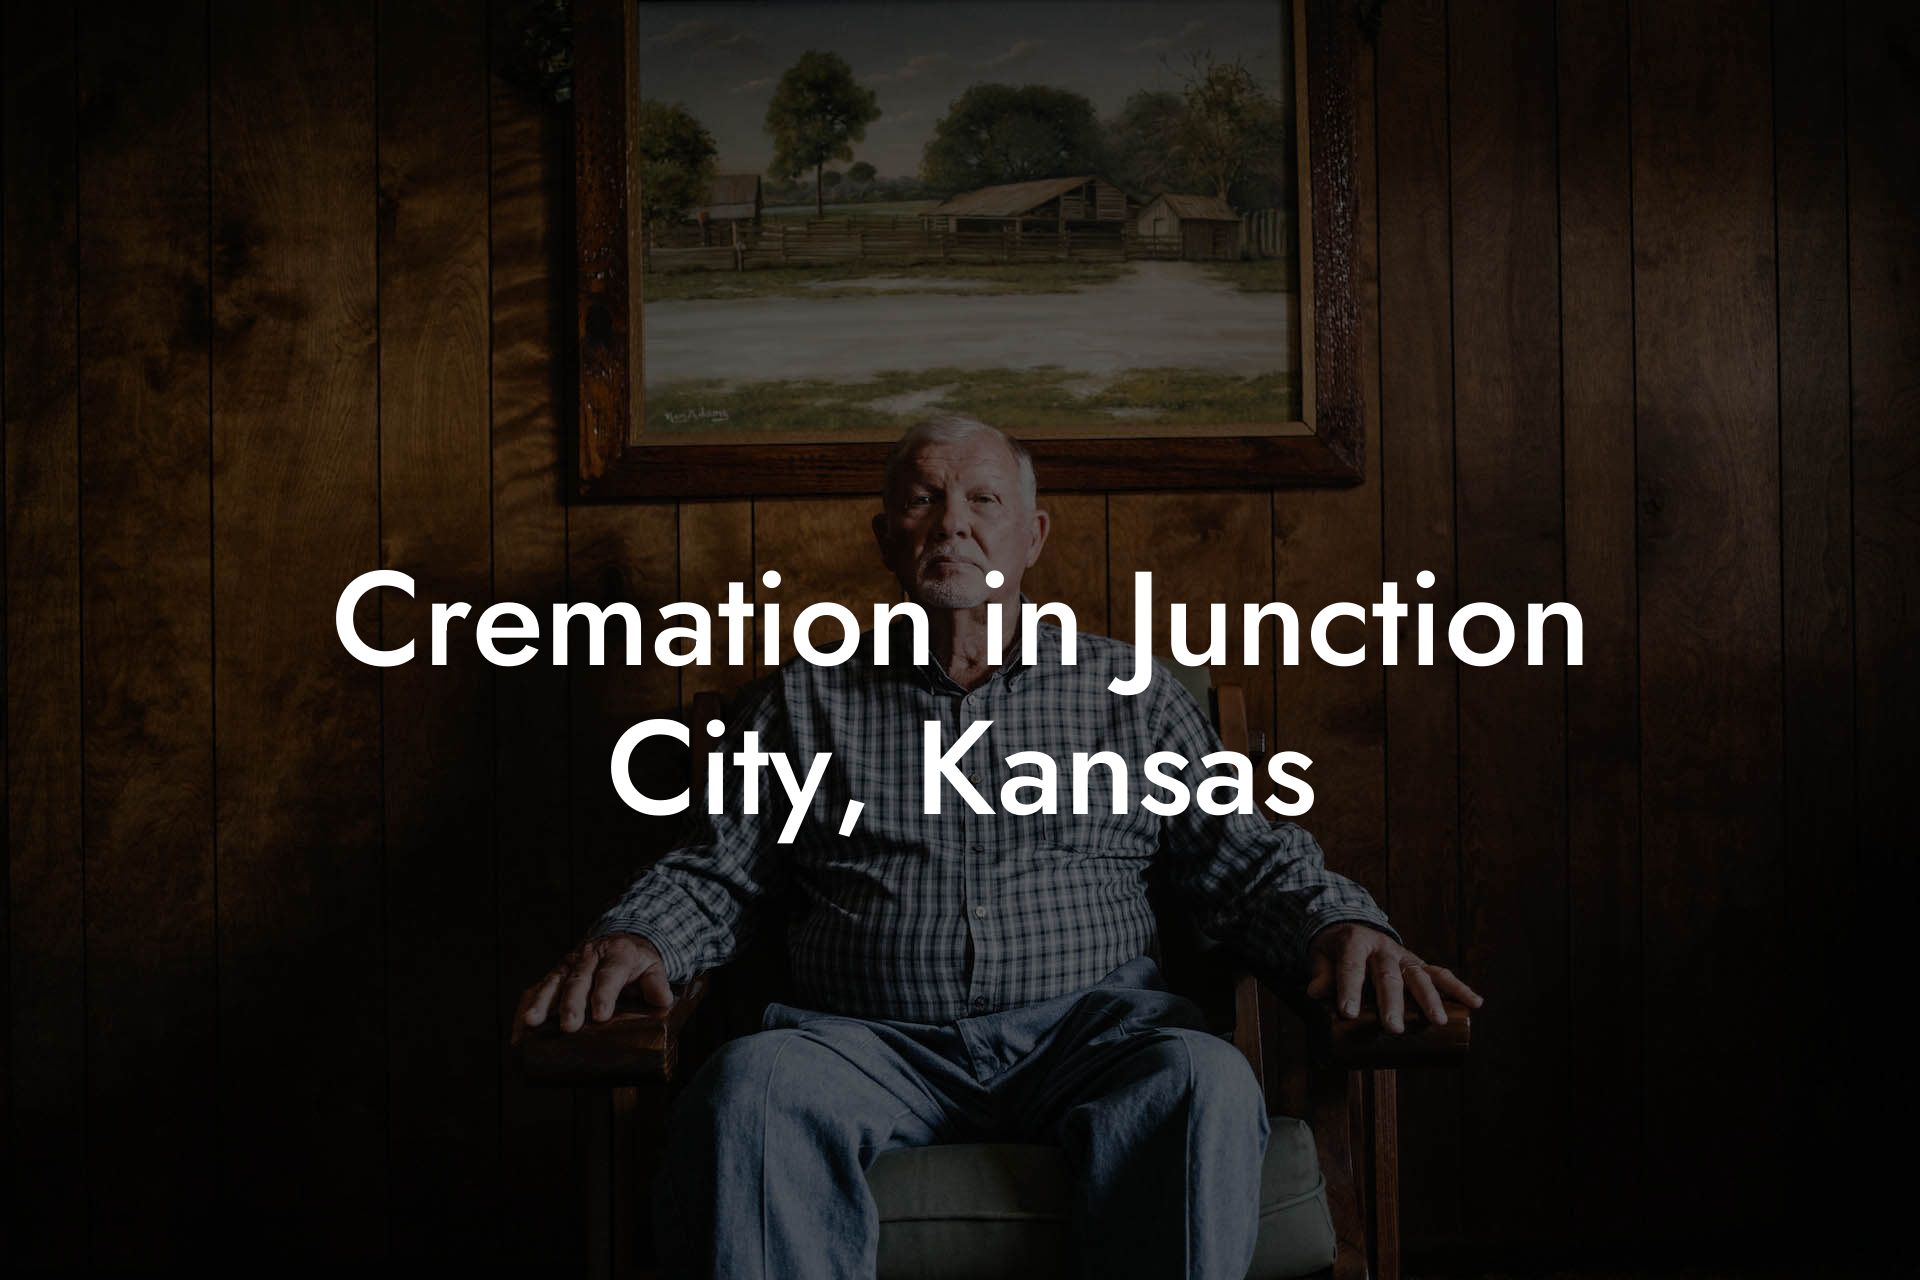 Cremation in Junction City, Kansas